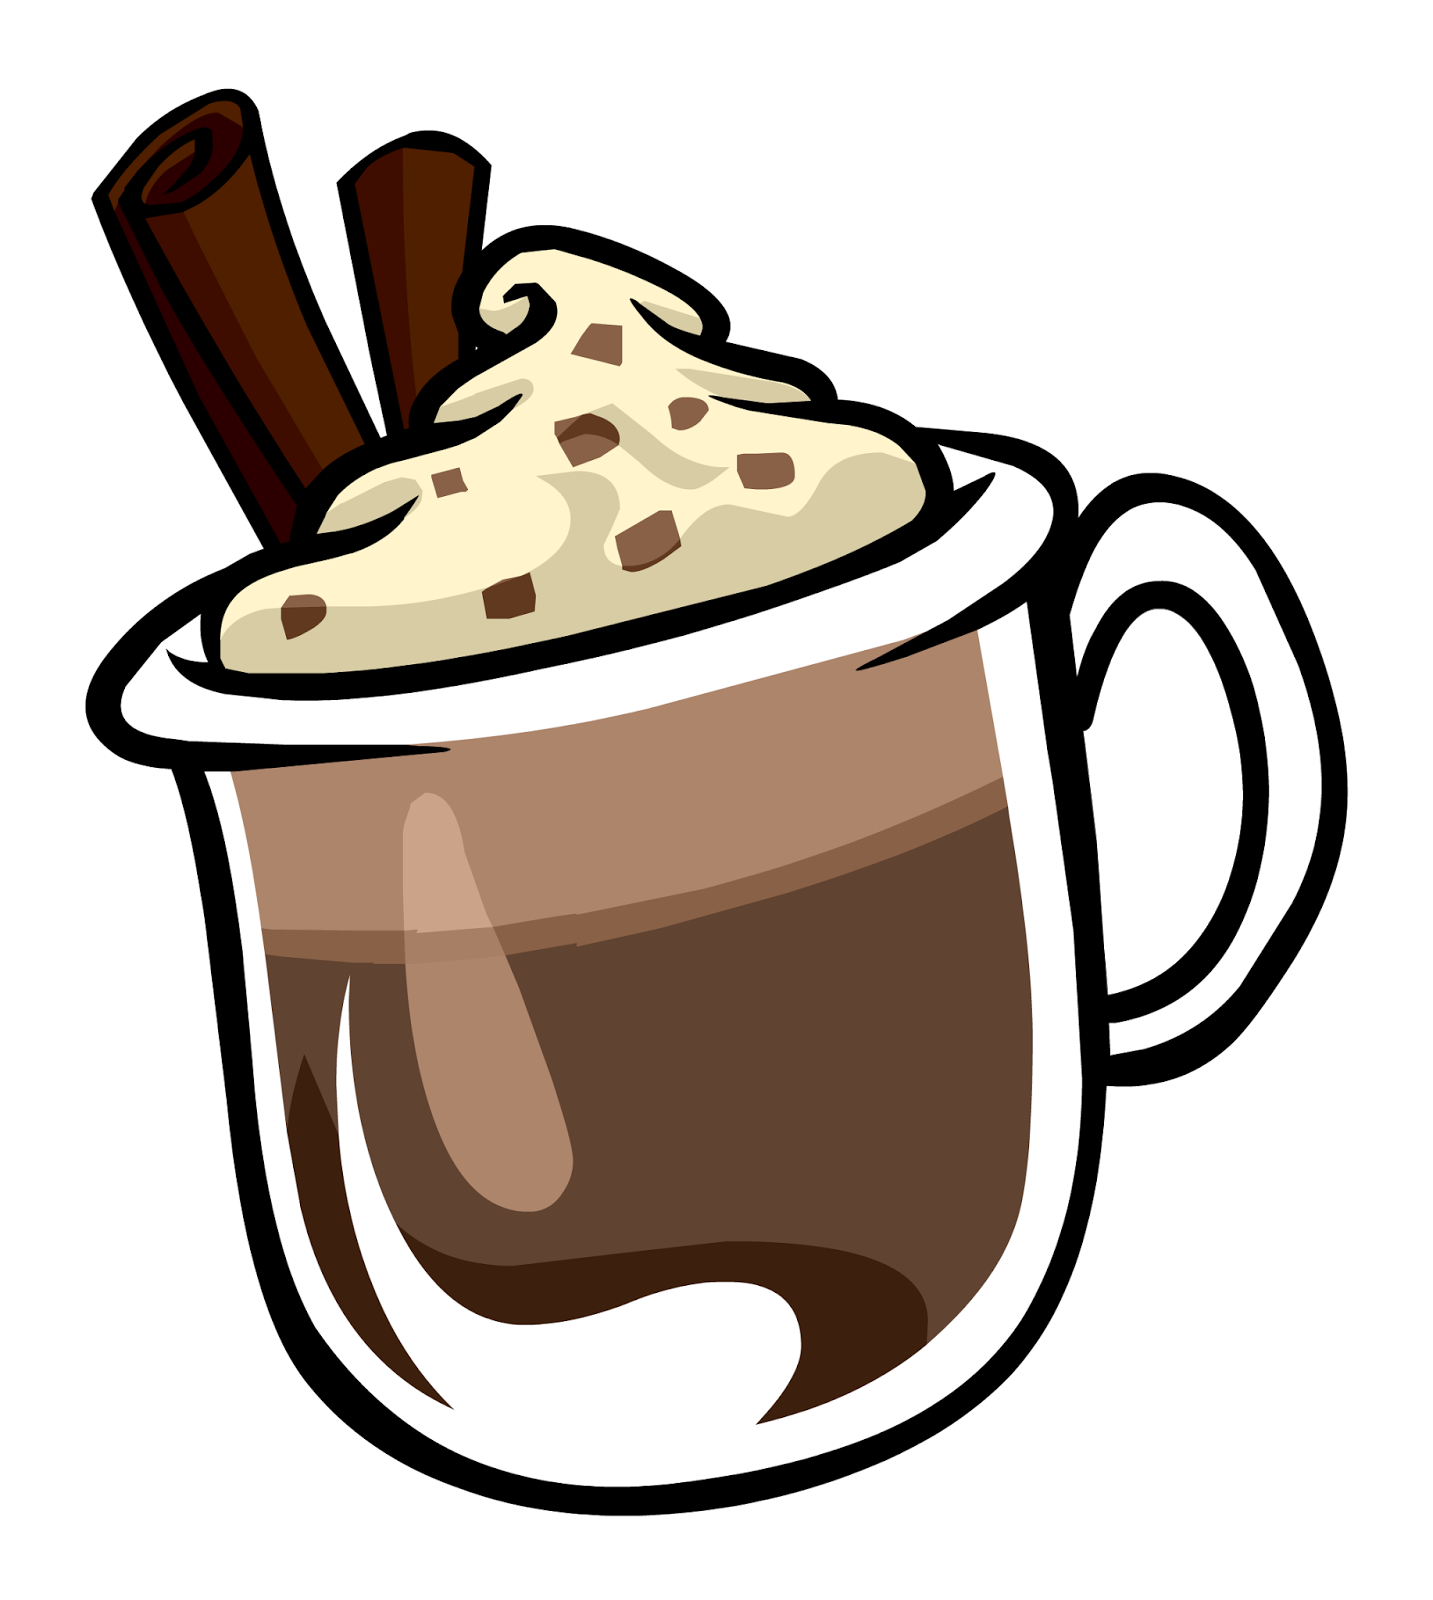 Drinking hot chocolate clipart collection png